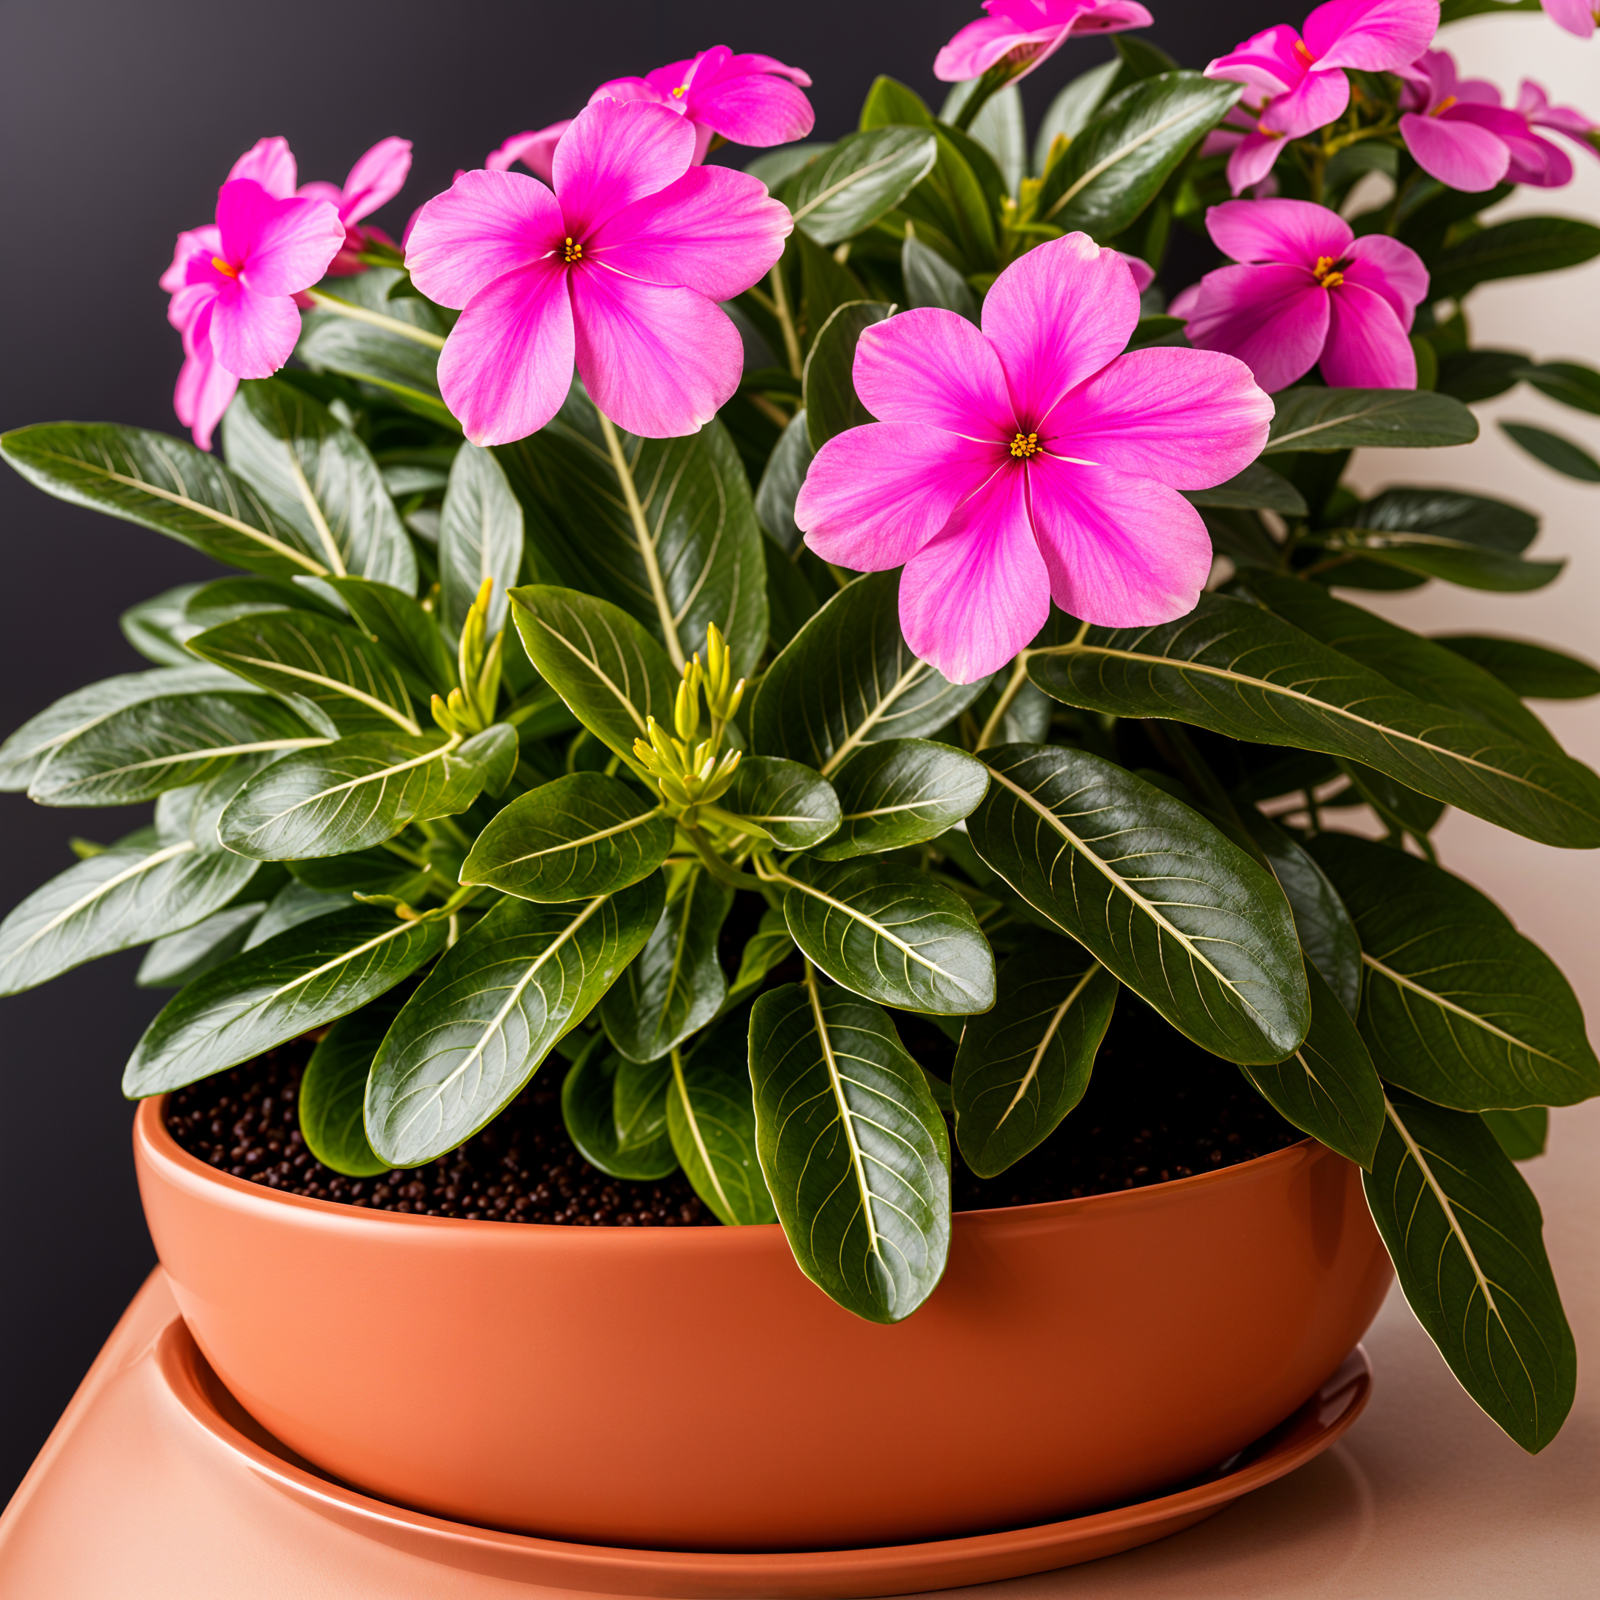 Catharanthus roseus plant in a planter, with a blooming flower, under clear indoor lighting.